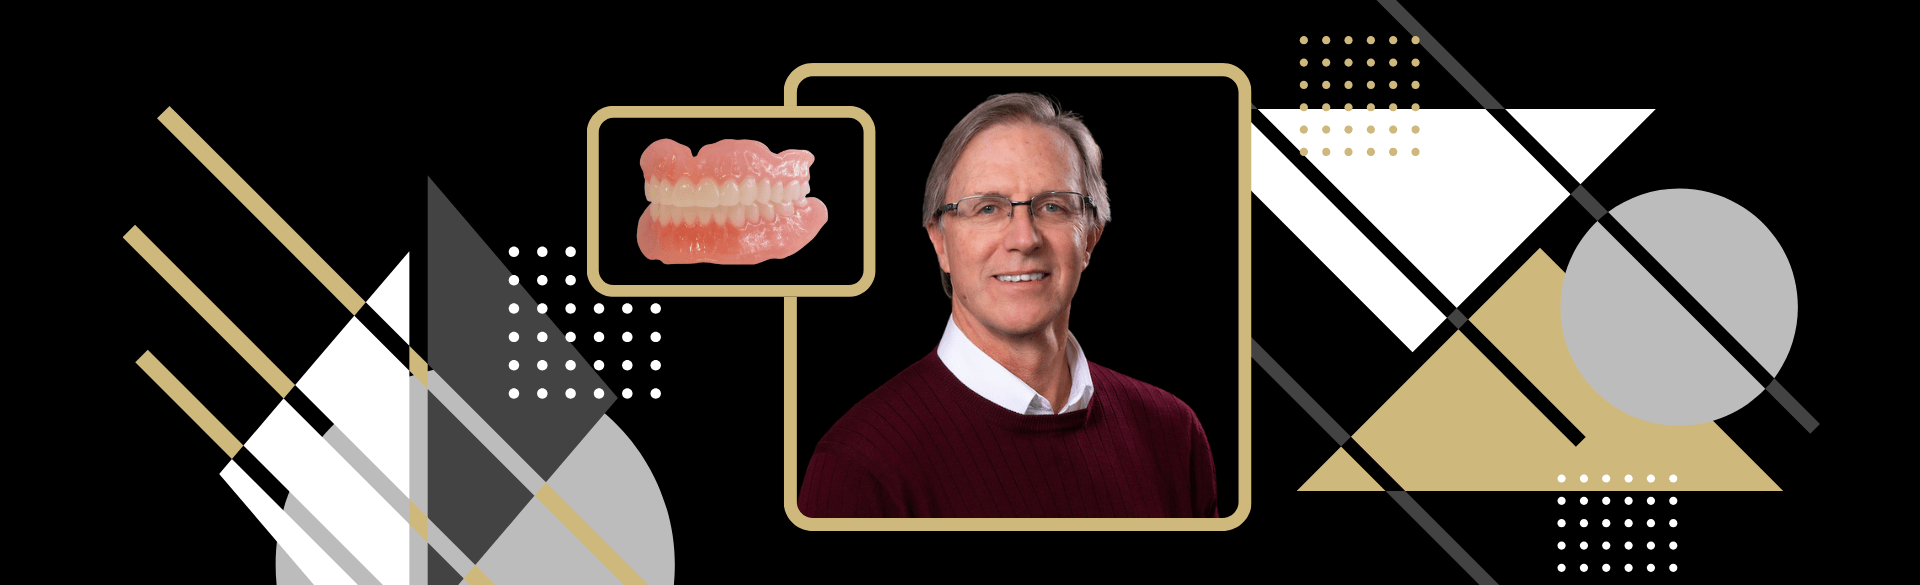 A black banner features an image of dentures alongside the grant recipient, Jeffrey Stansbury, PhD, senior associate dean for research and professor in the Department of Craniofacial Biology at the University of Colorado School of Dental Medicine (CU SDM). 